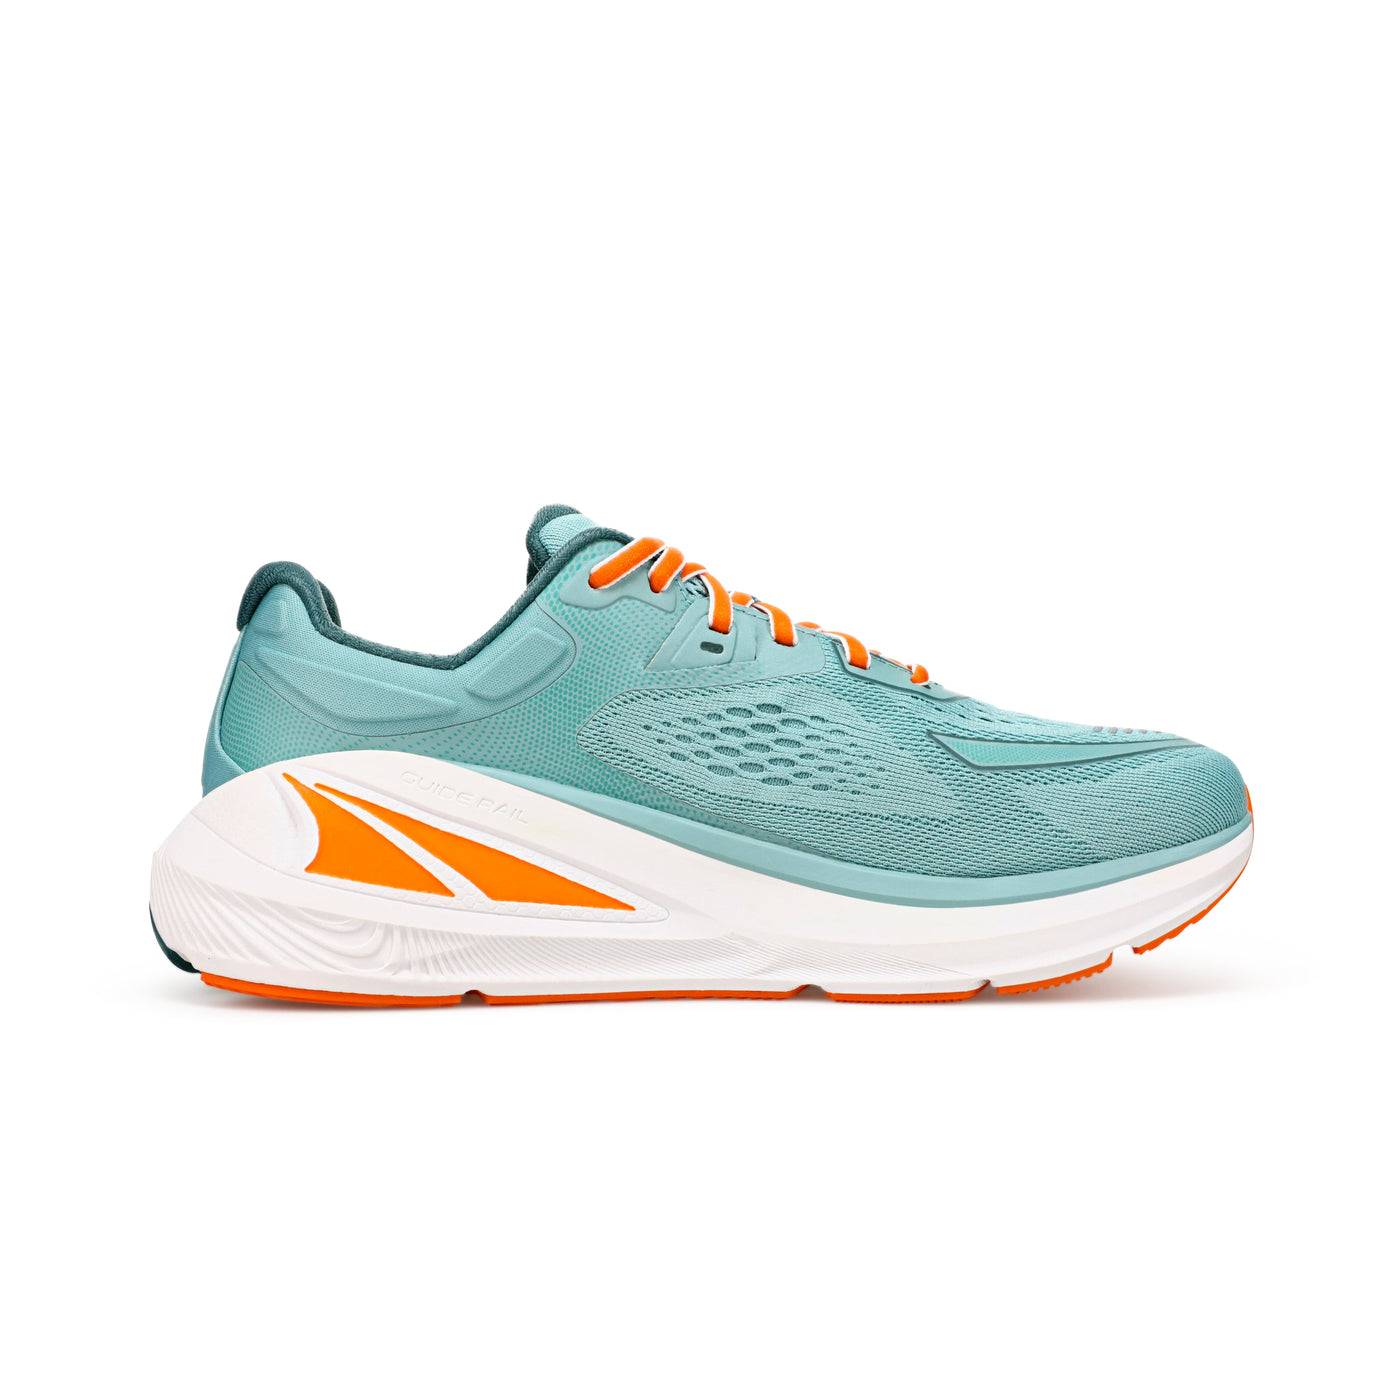 Altra Womens Paradigm 6 - Dusty Teal - Stability